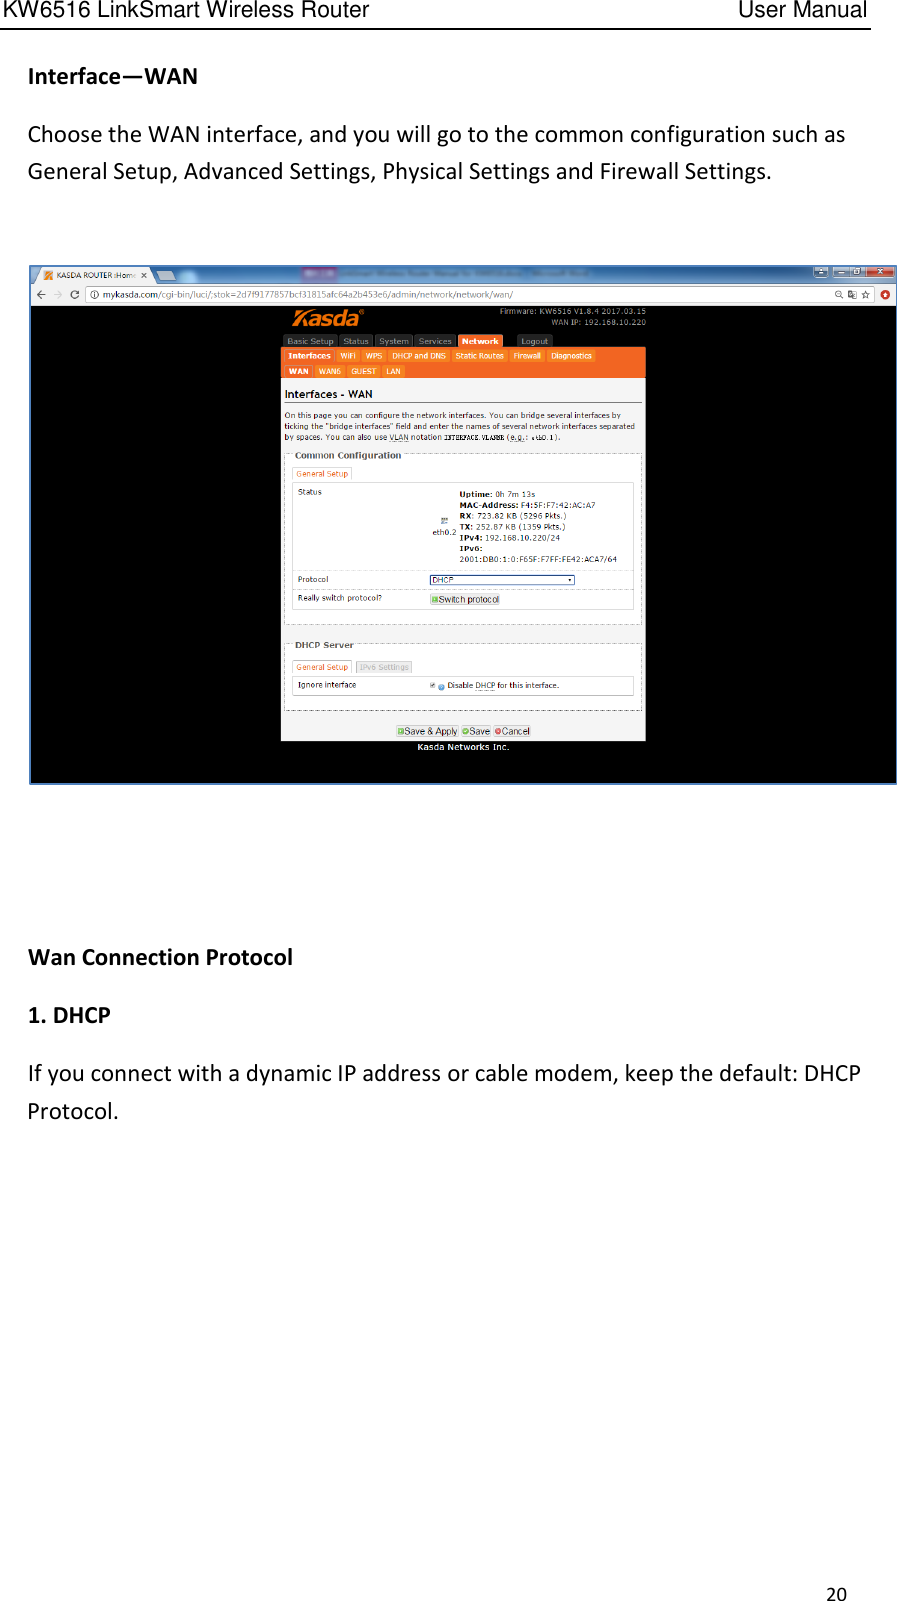 KW6516 LinkSmart Wireless Router         User Manual 20   Interface—WAN   Choose the WAN interface, and you will go to the common configuration such as General Setup, Advanced Settings, Physical Settings and Firewall Settings.          Wan Connection Protocol   1. DHCP   If you connect with a dynamic IP address or cable modem, keep the default: DHCP Protocol. 